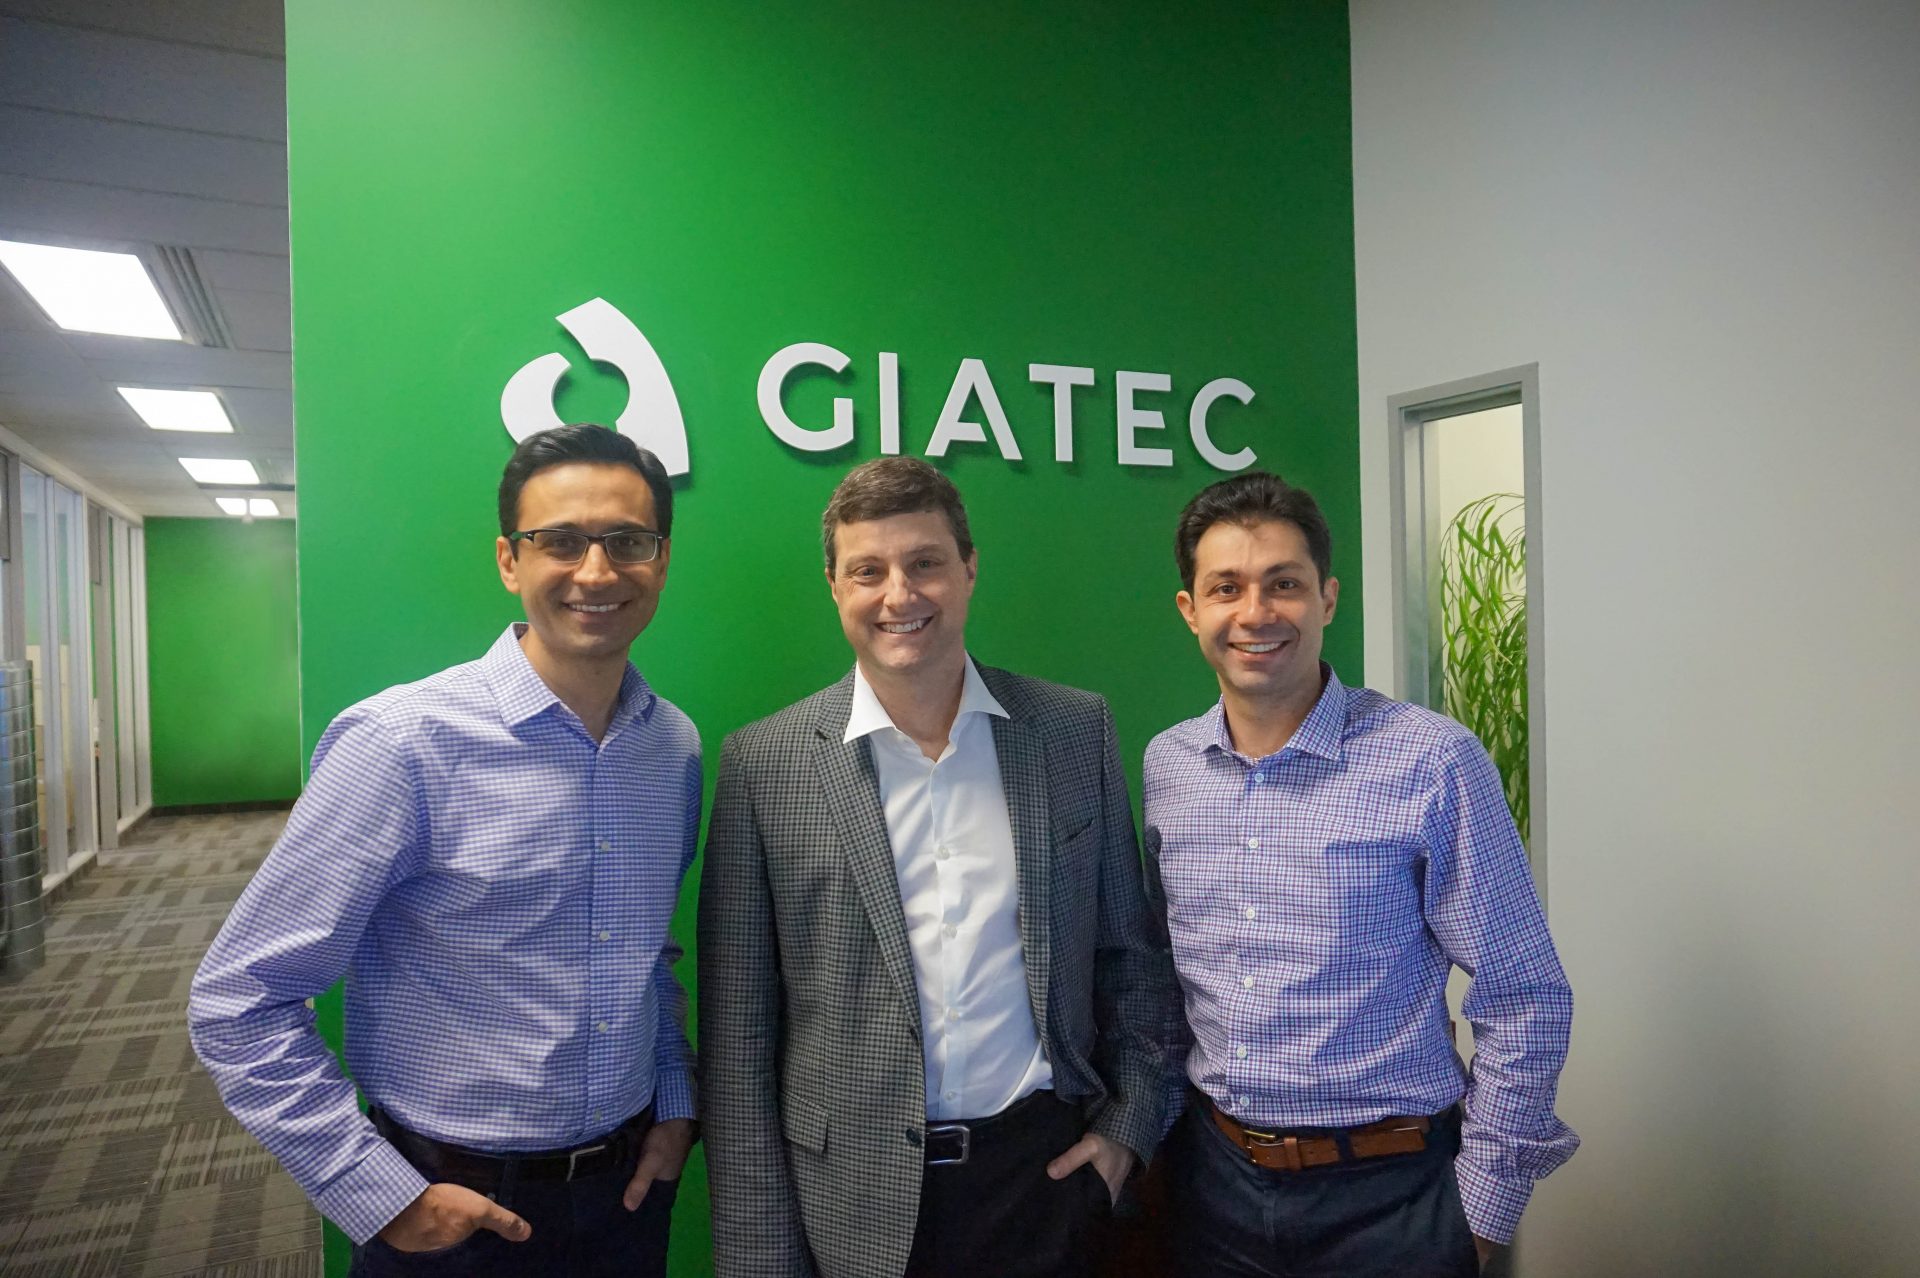 New CEO Paul Loucks, with Giatec co-founders Aali and Pouria